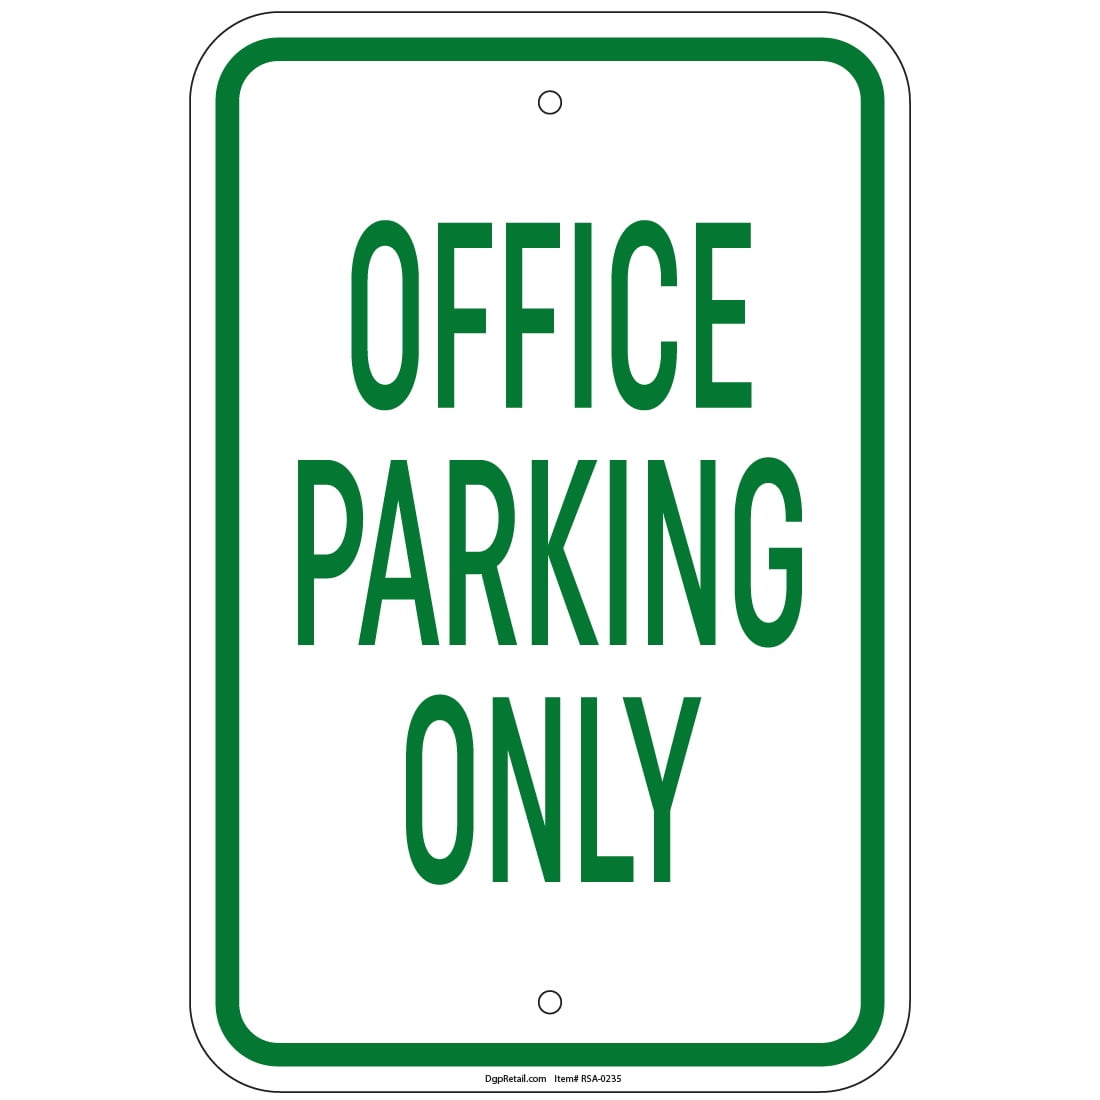 JEWELRY STORE 12"x18" BUSINESS RETAIL STORE PARKING SIGNS 